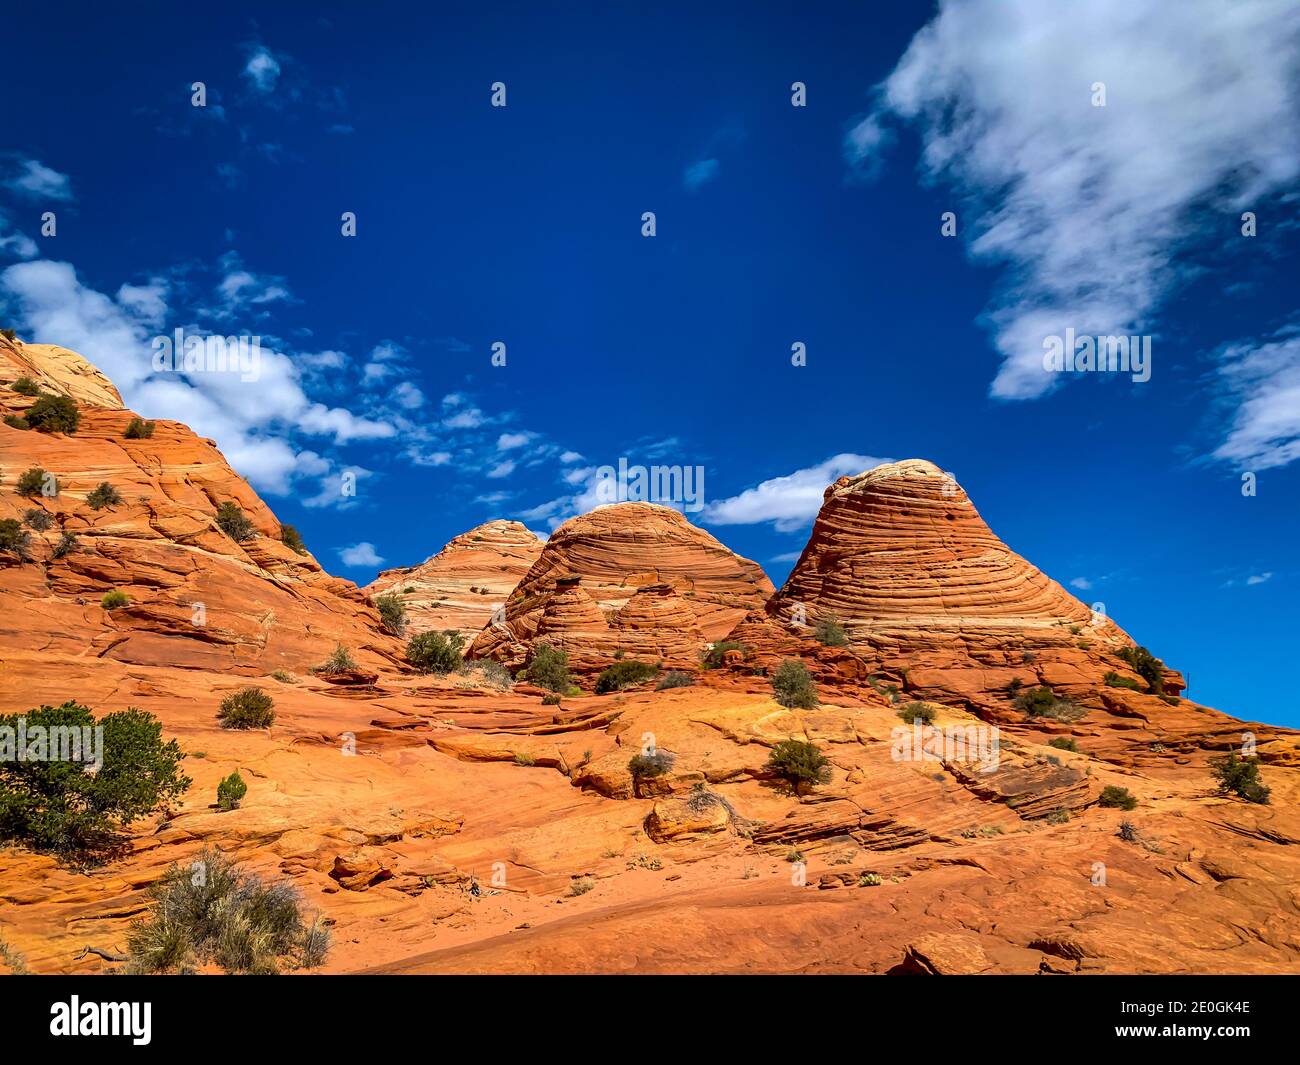 Sandstone rock formations located in Coyote Butte North, Arizona Stock Photo